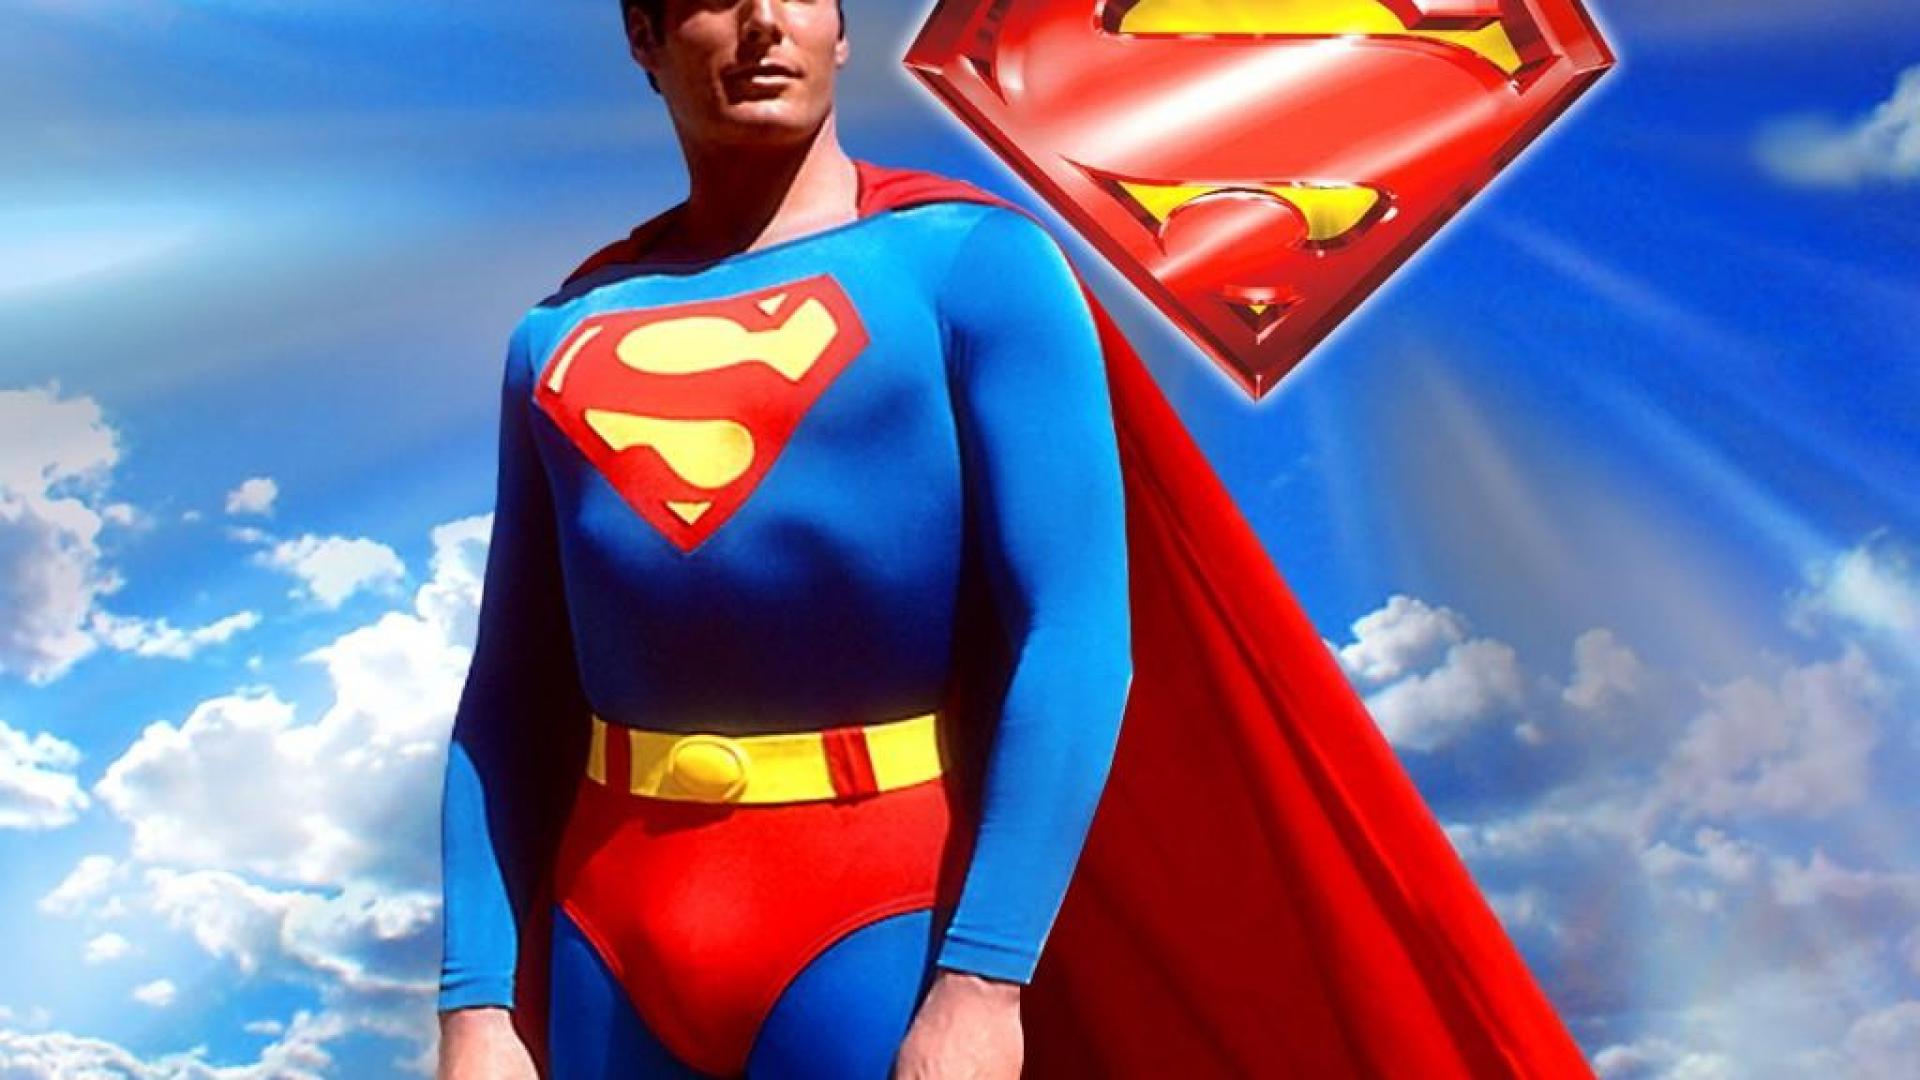 Superman - (#147547) - High Quality and Resolution Wallpapers on ...